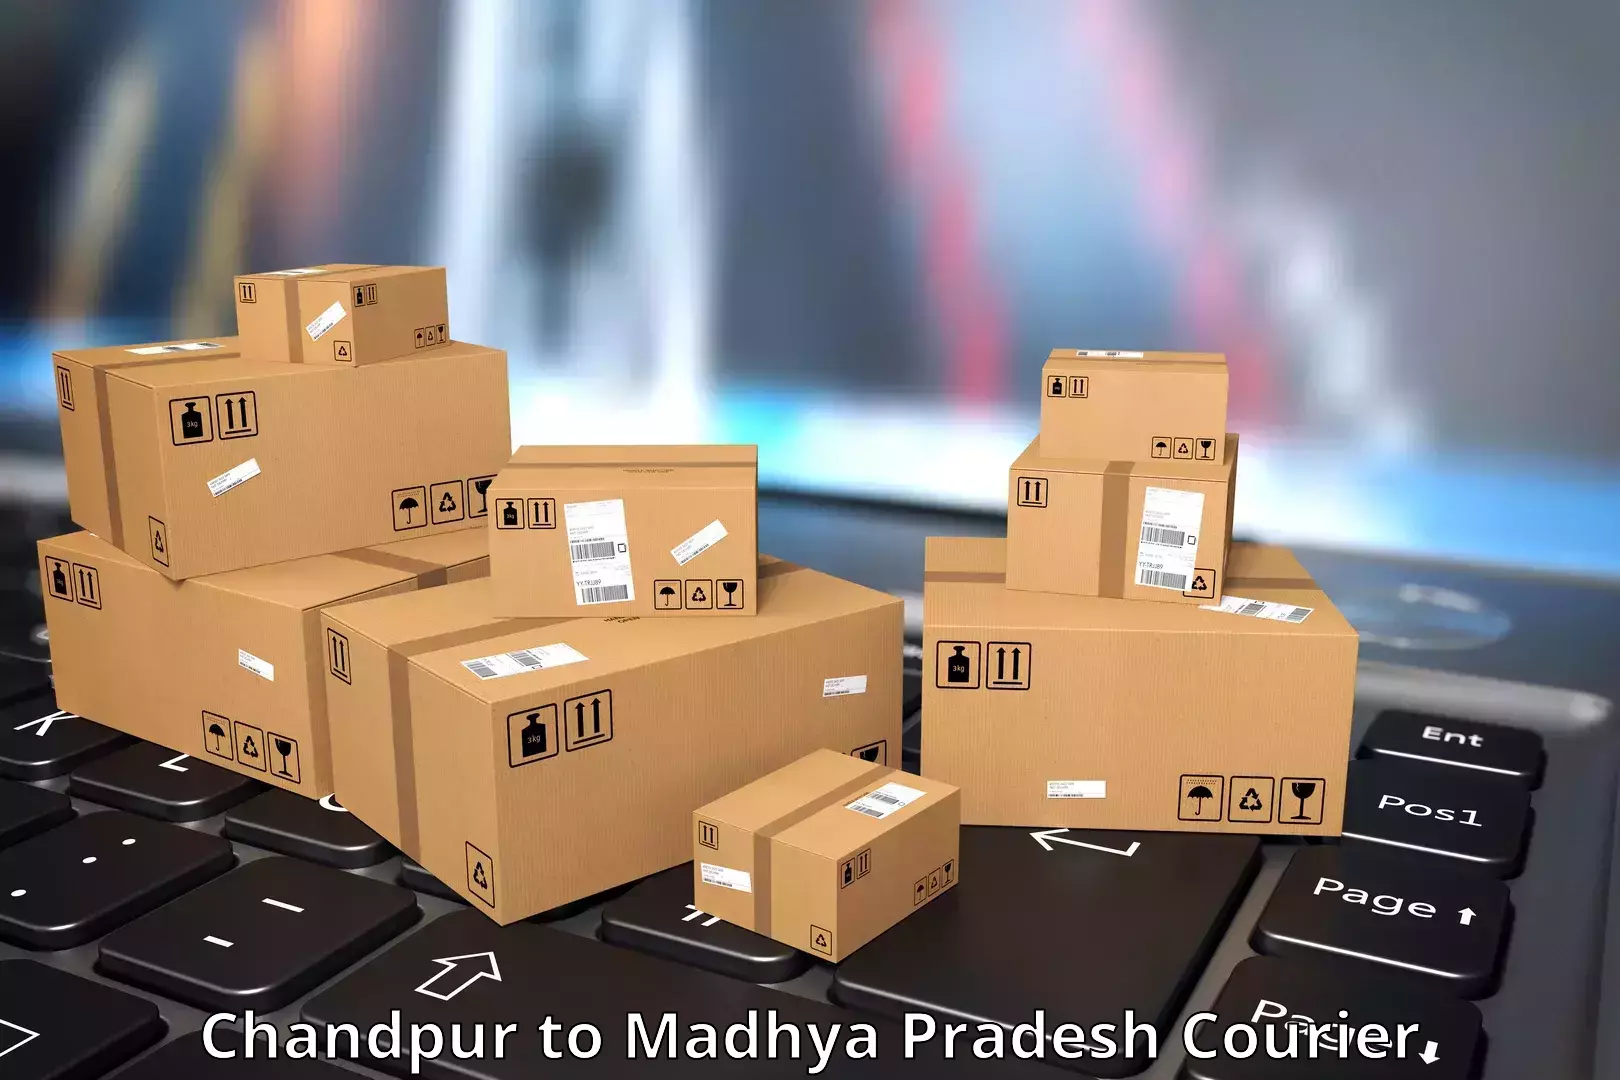 Express package handling in Chandpur to Indore